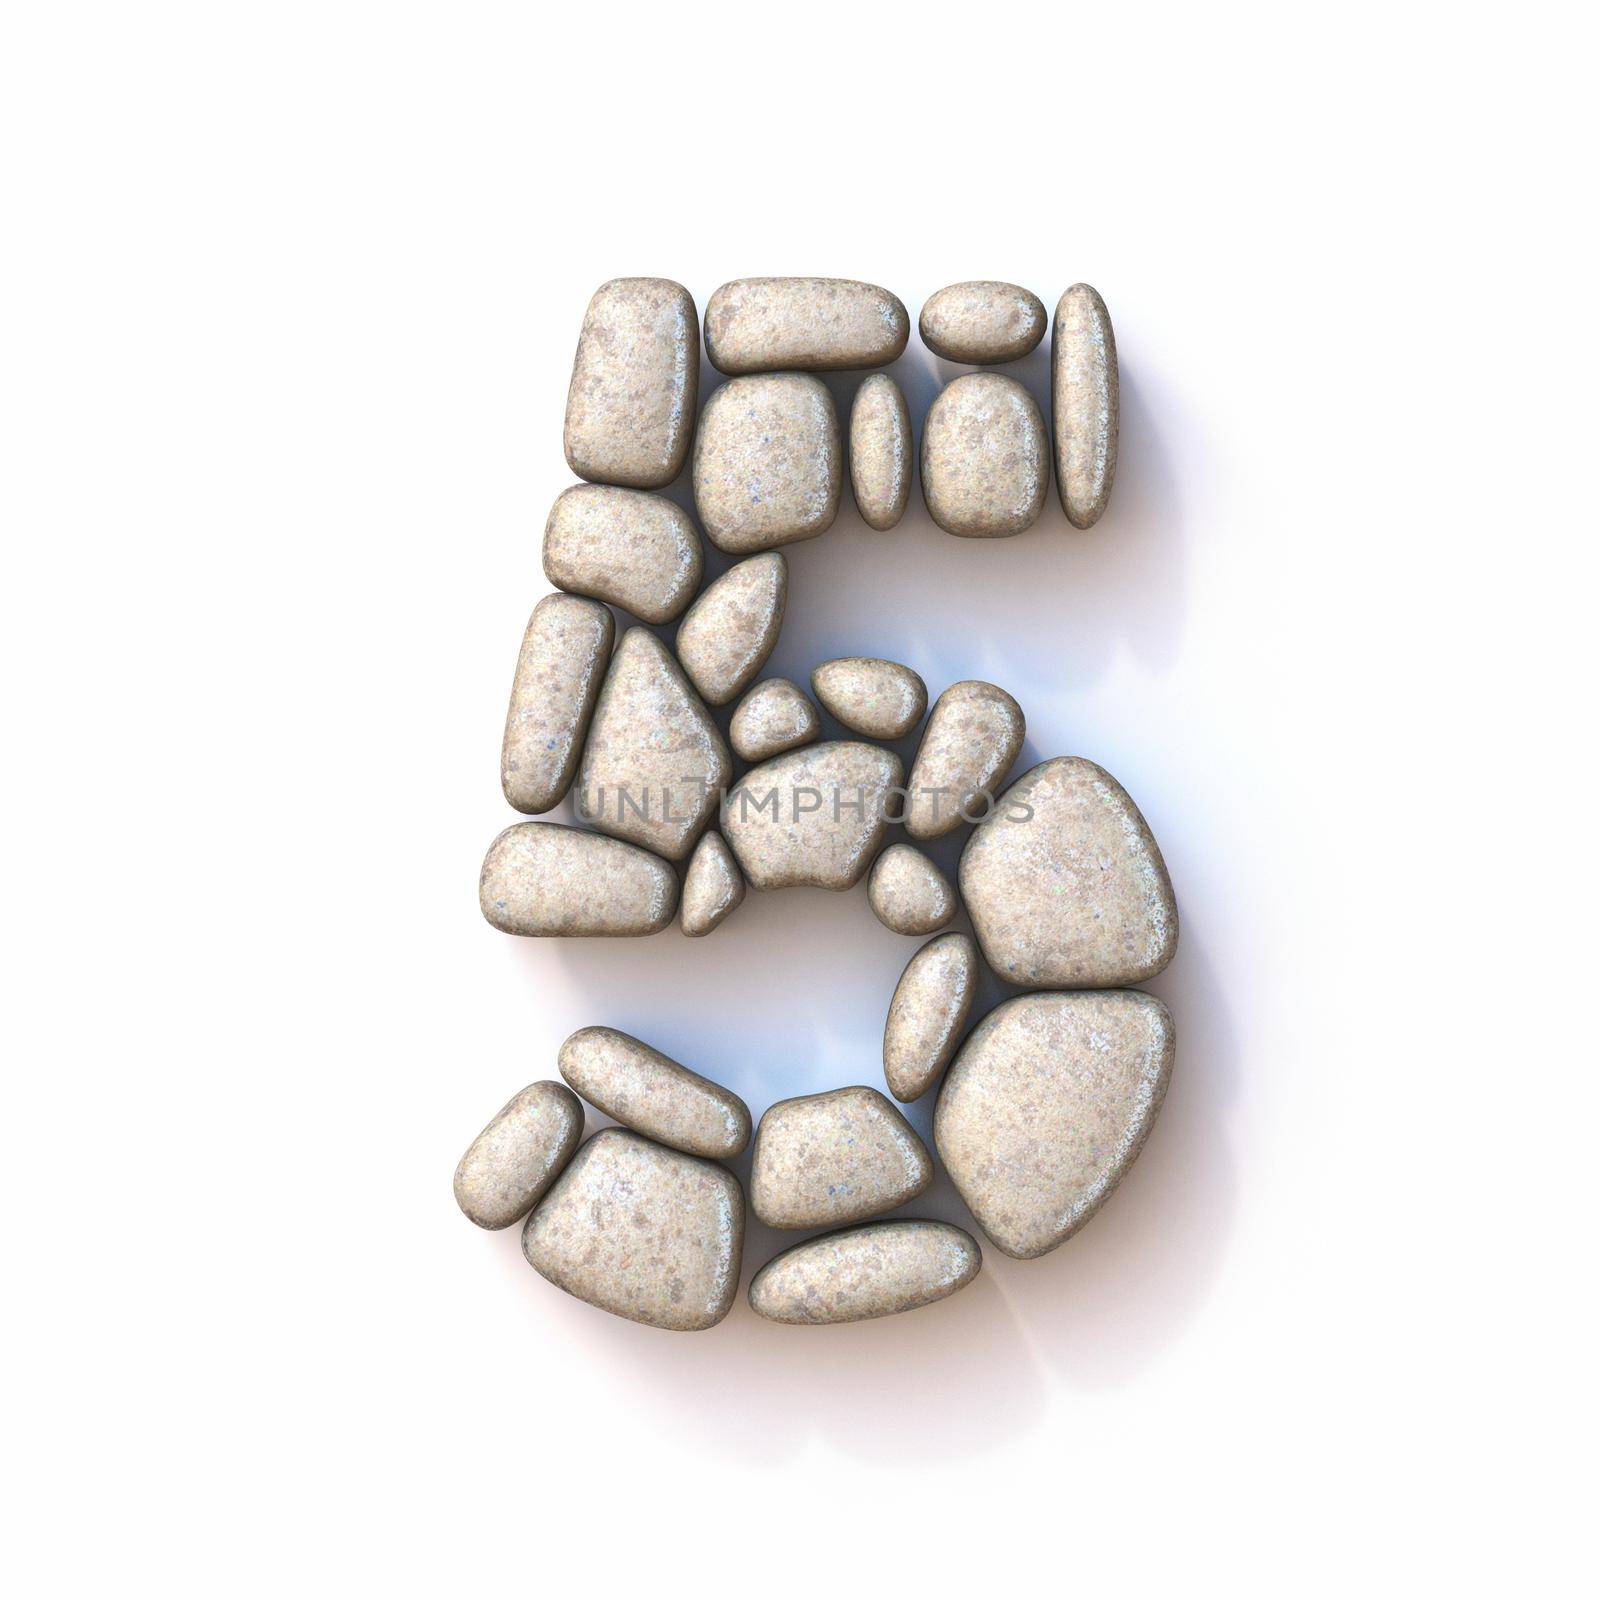 Pebble font Number 5 FIVE 3D rendering illustration isolated on white background